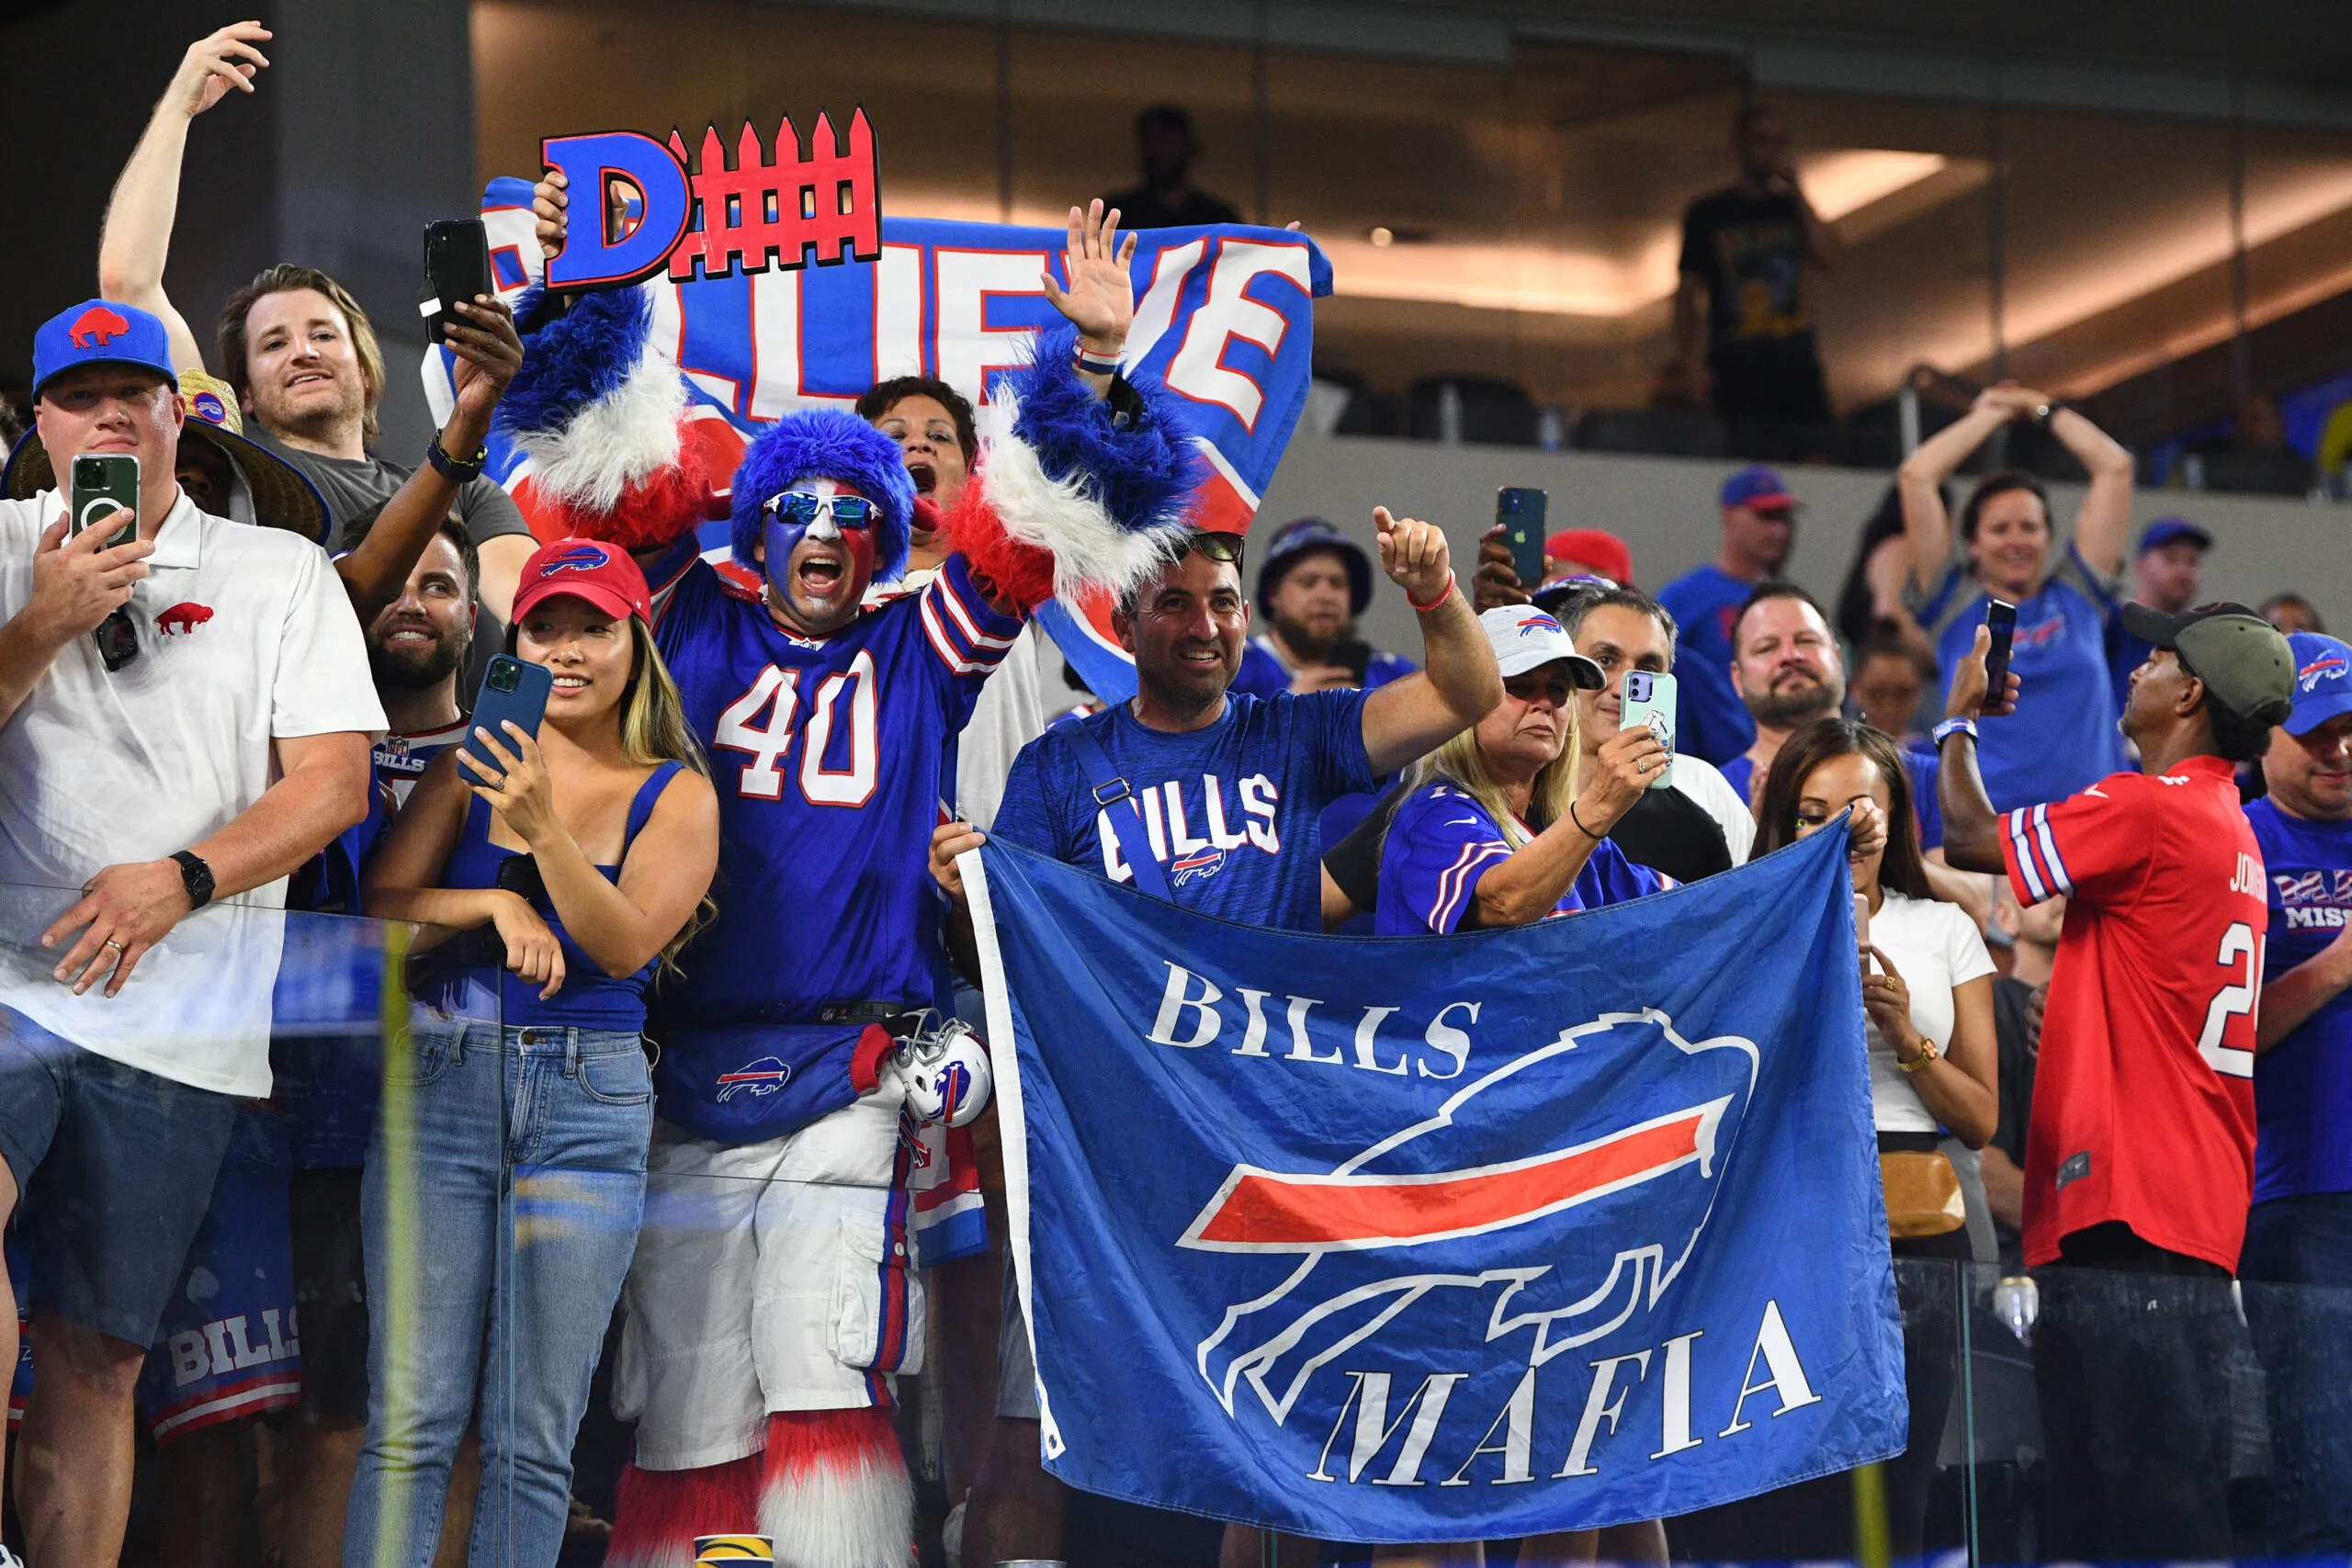 INGLEWOOD, CA - SEPTEMBER 08: A Bills fan holds up a Bills Mafia sign after the NFL game between the Buffalo Bills and the Los Angeles Rams on September 8, 2022, at SoFi Stadium in Inglewood, CA. (Photo by Brian Rothmuller/Icon Sportswire via Getty Images)